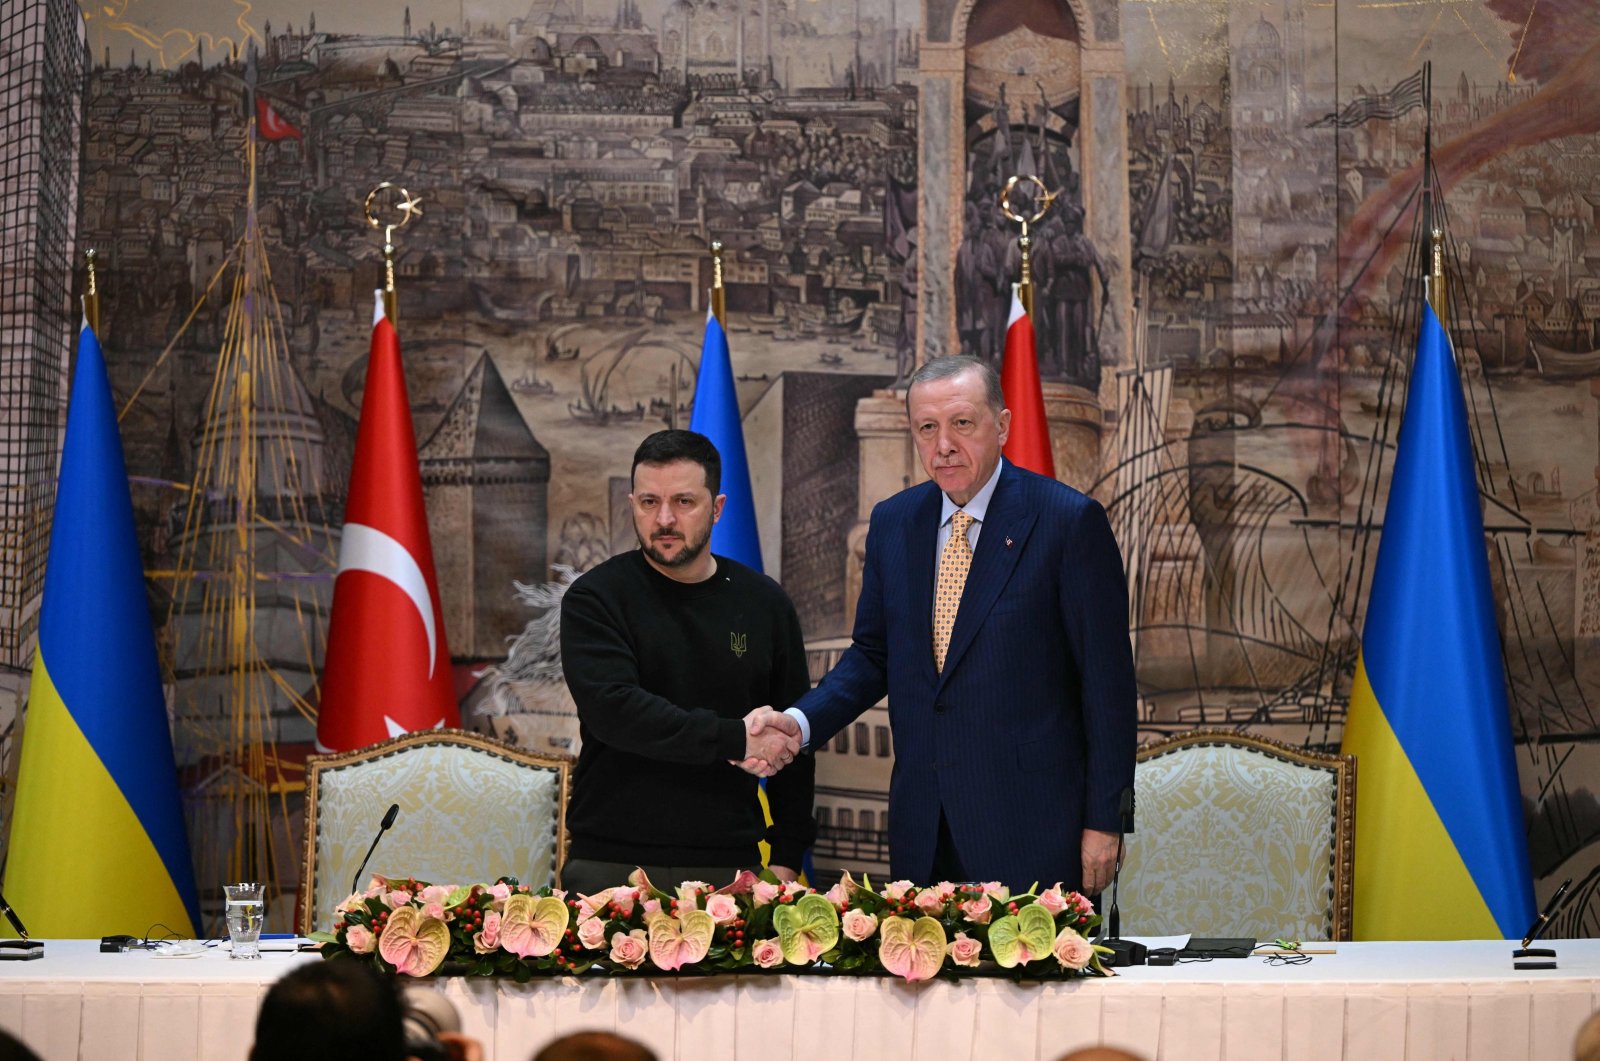  President Recep Tayyip Erdoğan shakes hands with Ukrainian President Volodymyr Zelenskyy after a joint news conference at the Dolmabahçe Presidental office in Istanbul, March 8, 2024. (AFP Photo)